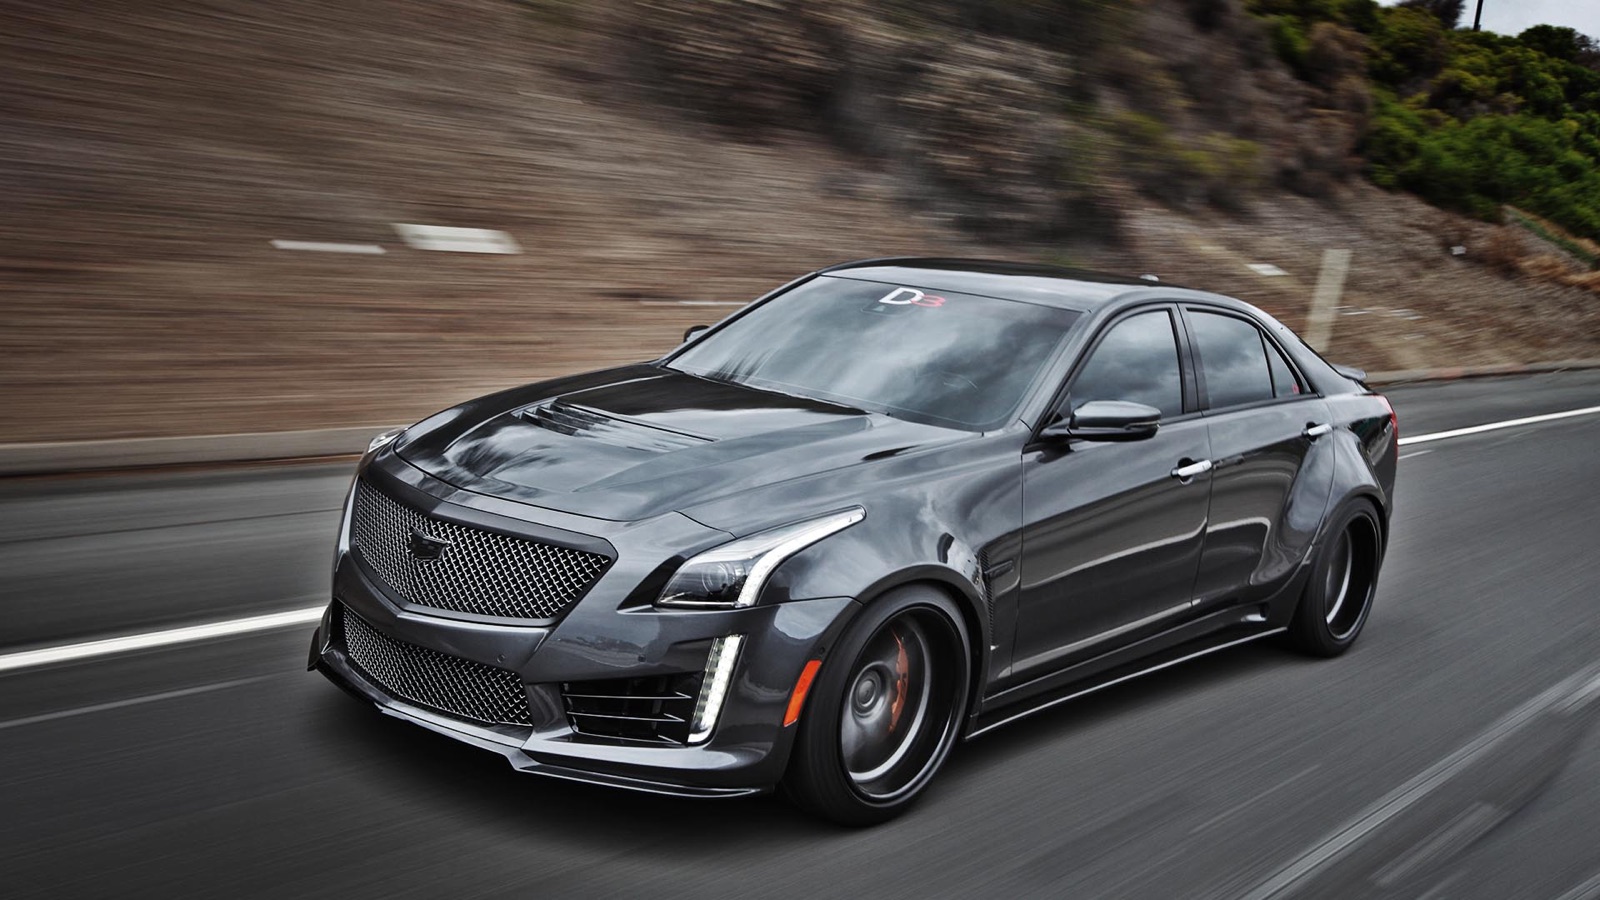 D3 Cadillac Does It Again With A Beastly Widebody Cadillac CTS-V